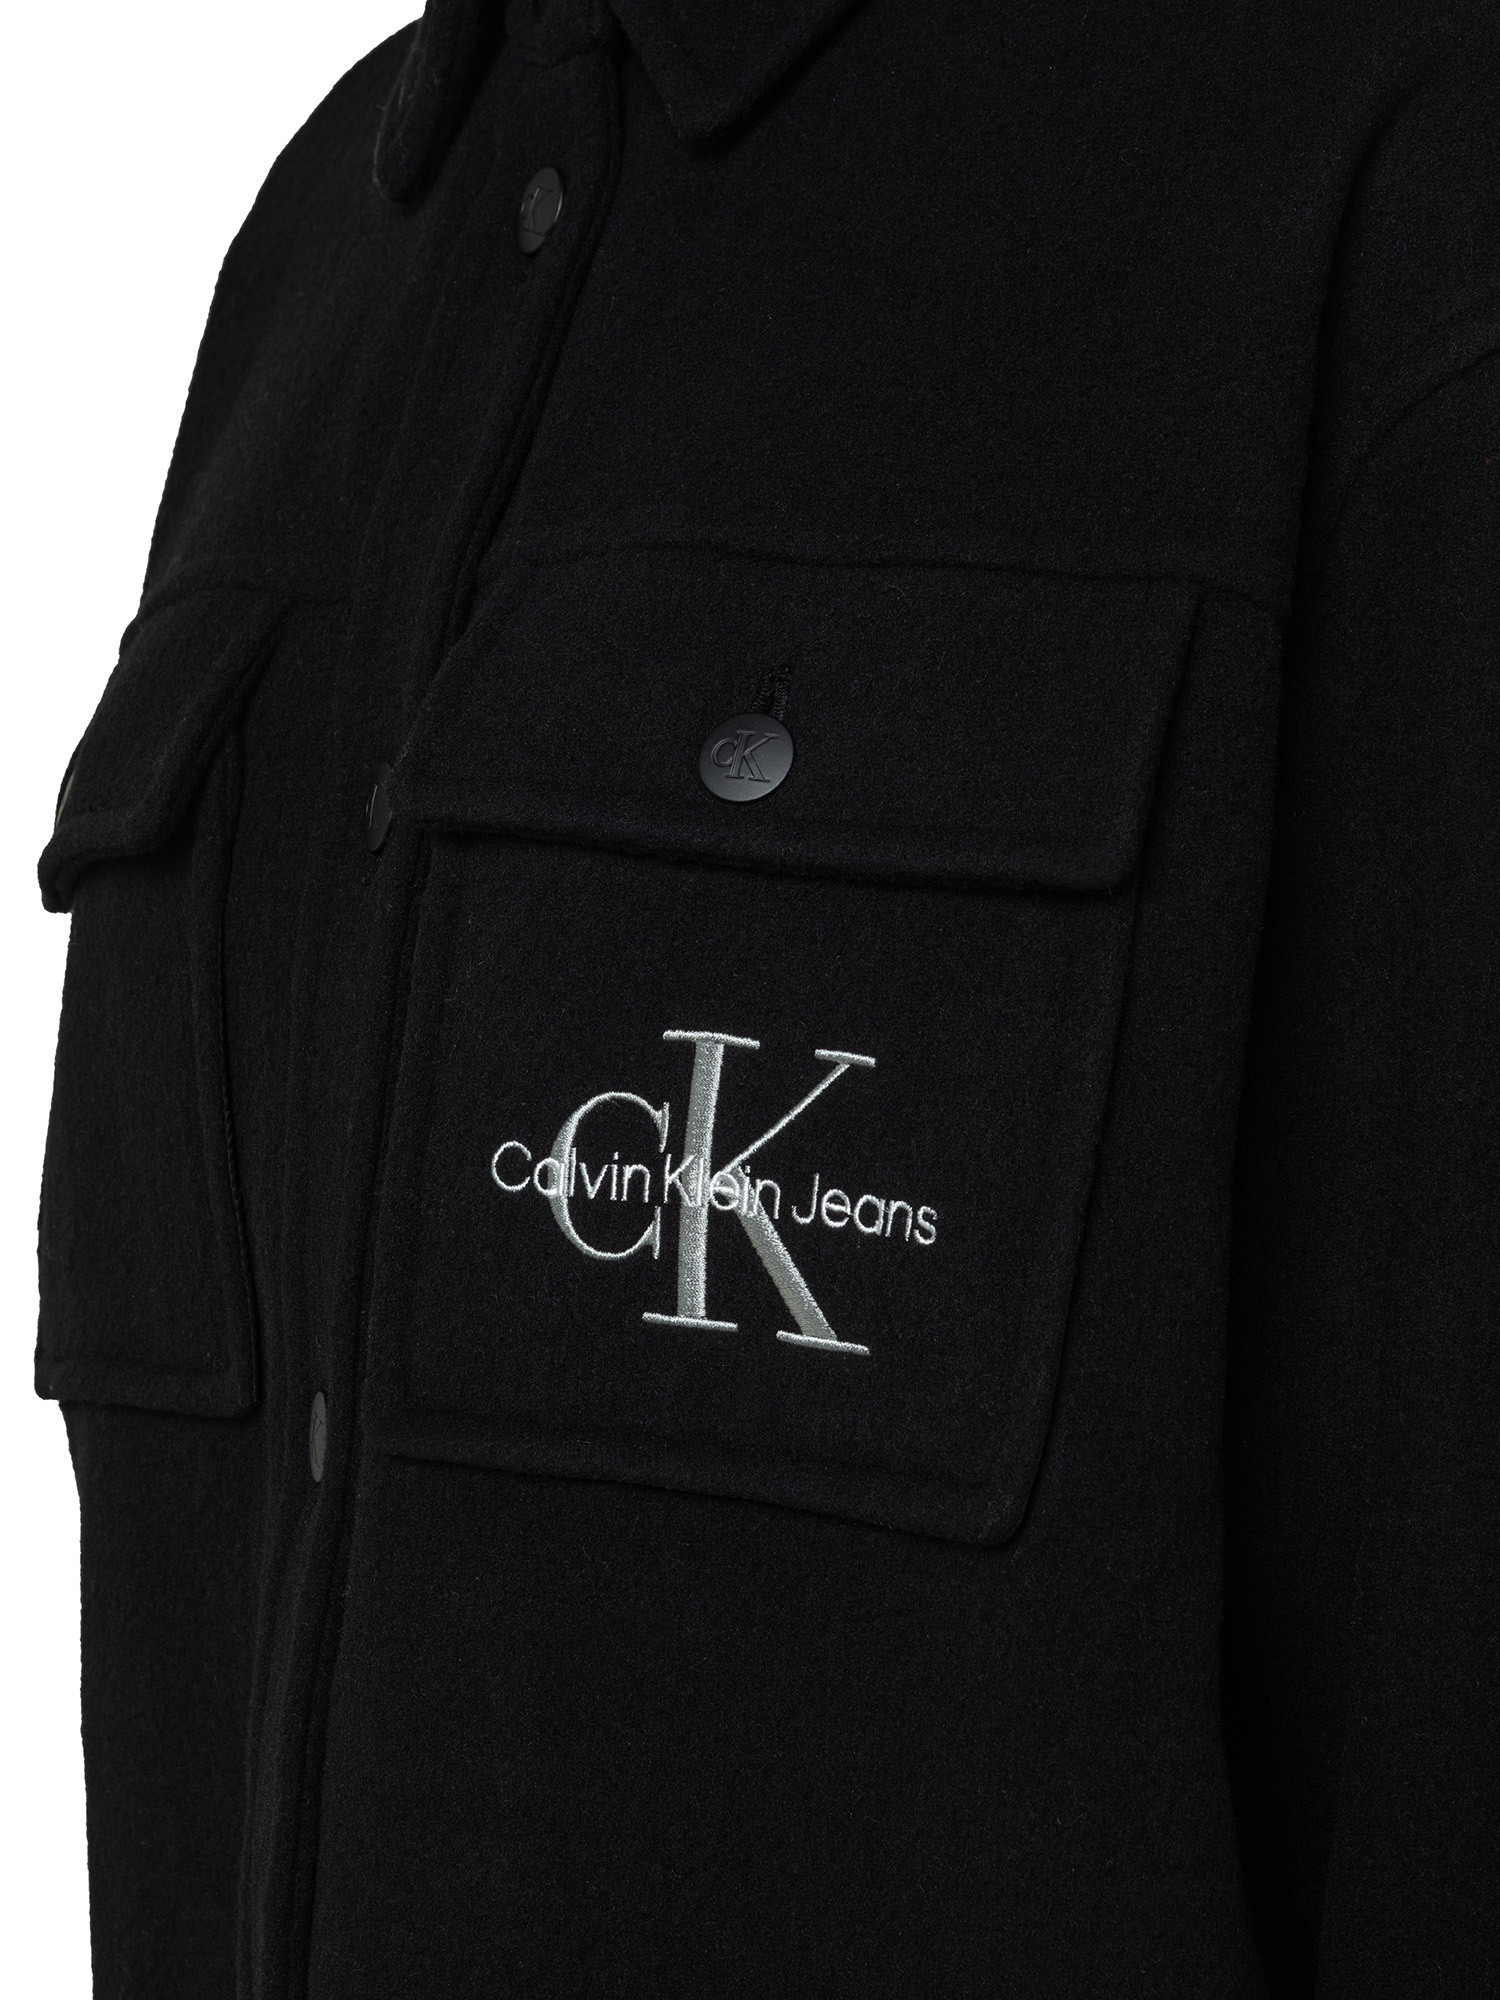 Calvin Klein Jeans - Giacca con logo, Nero, large image number 2